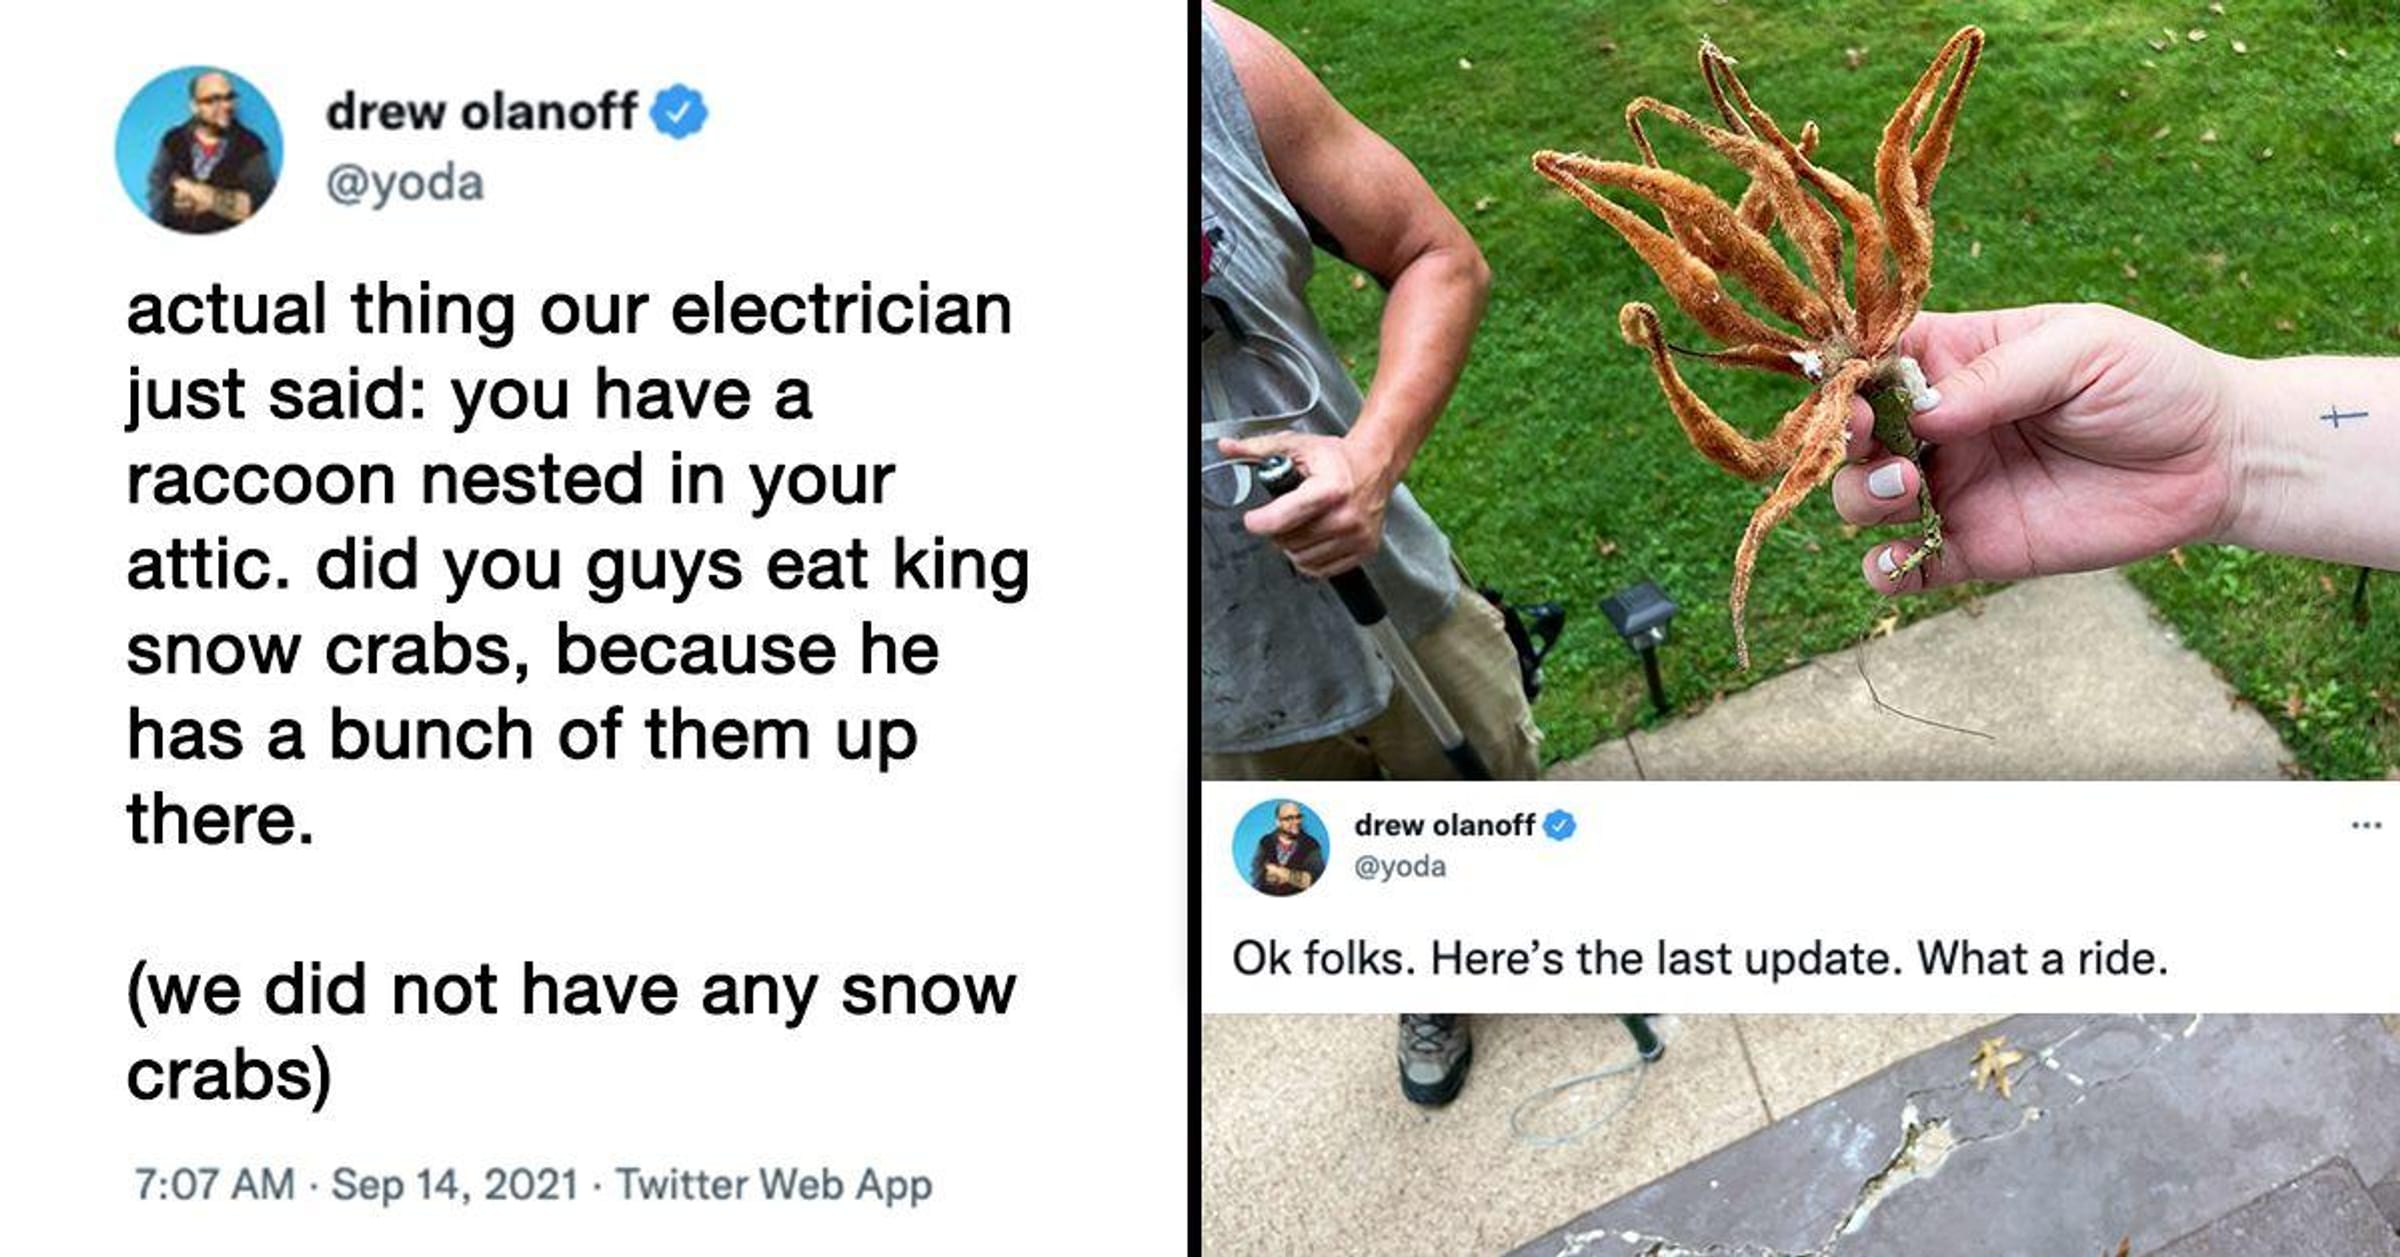 19 Tweets From The First Week Of April That Are Fuckin' Hilarious